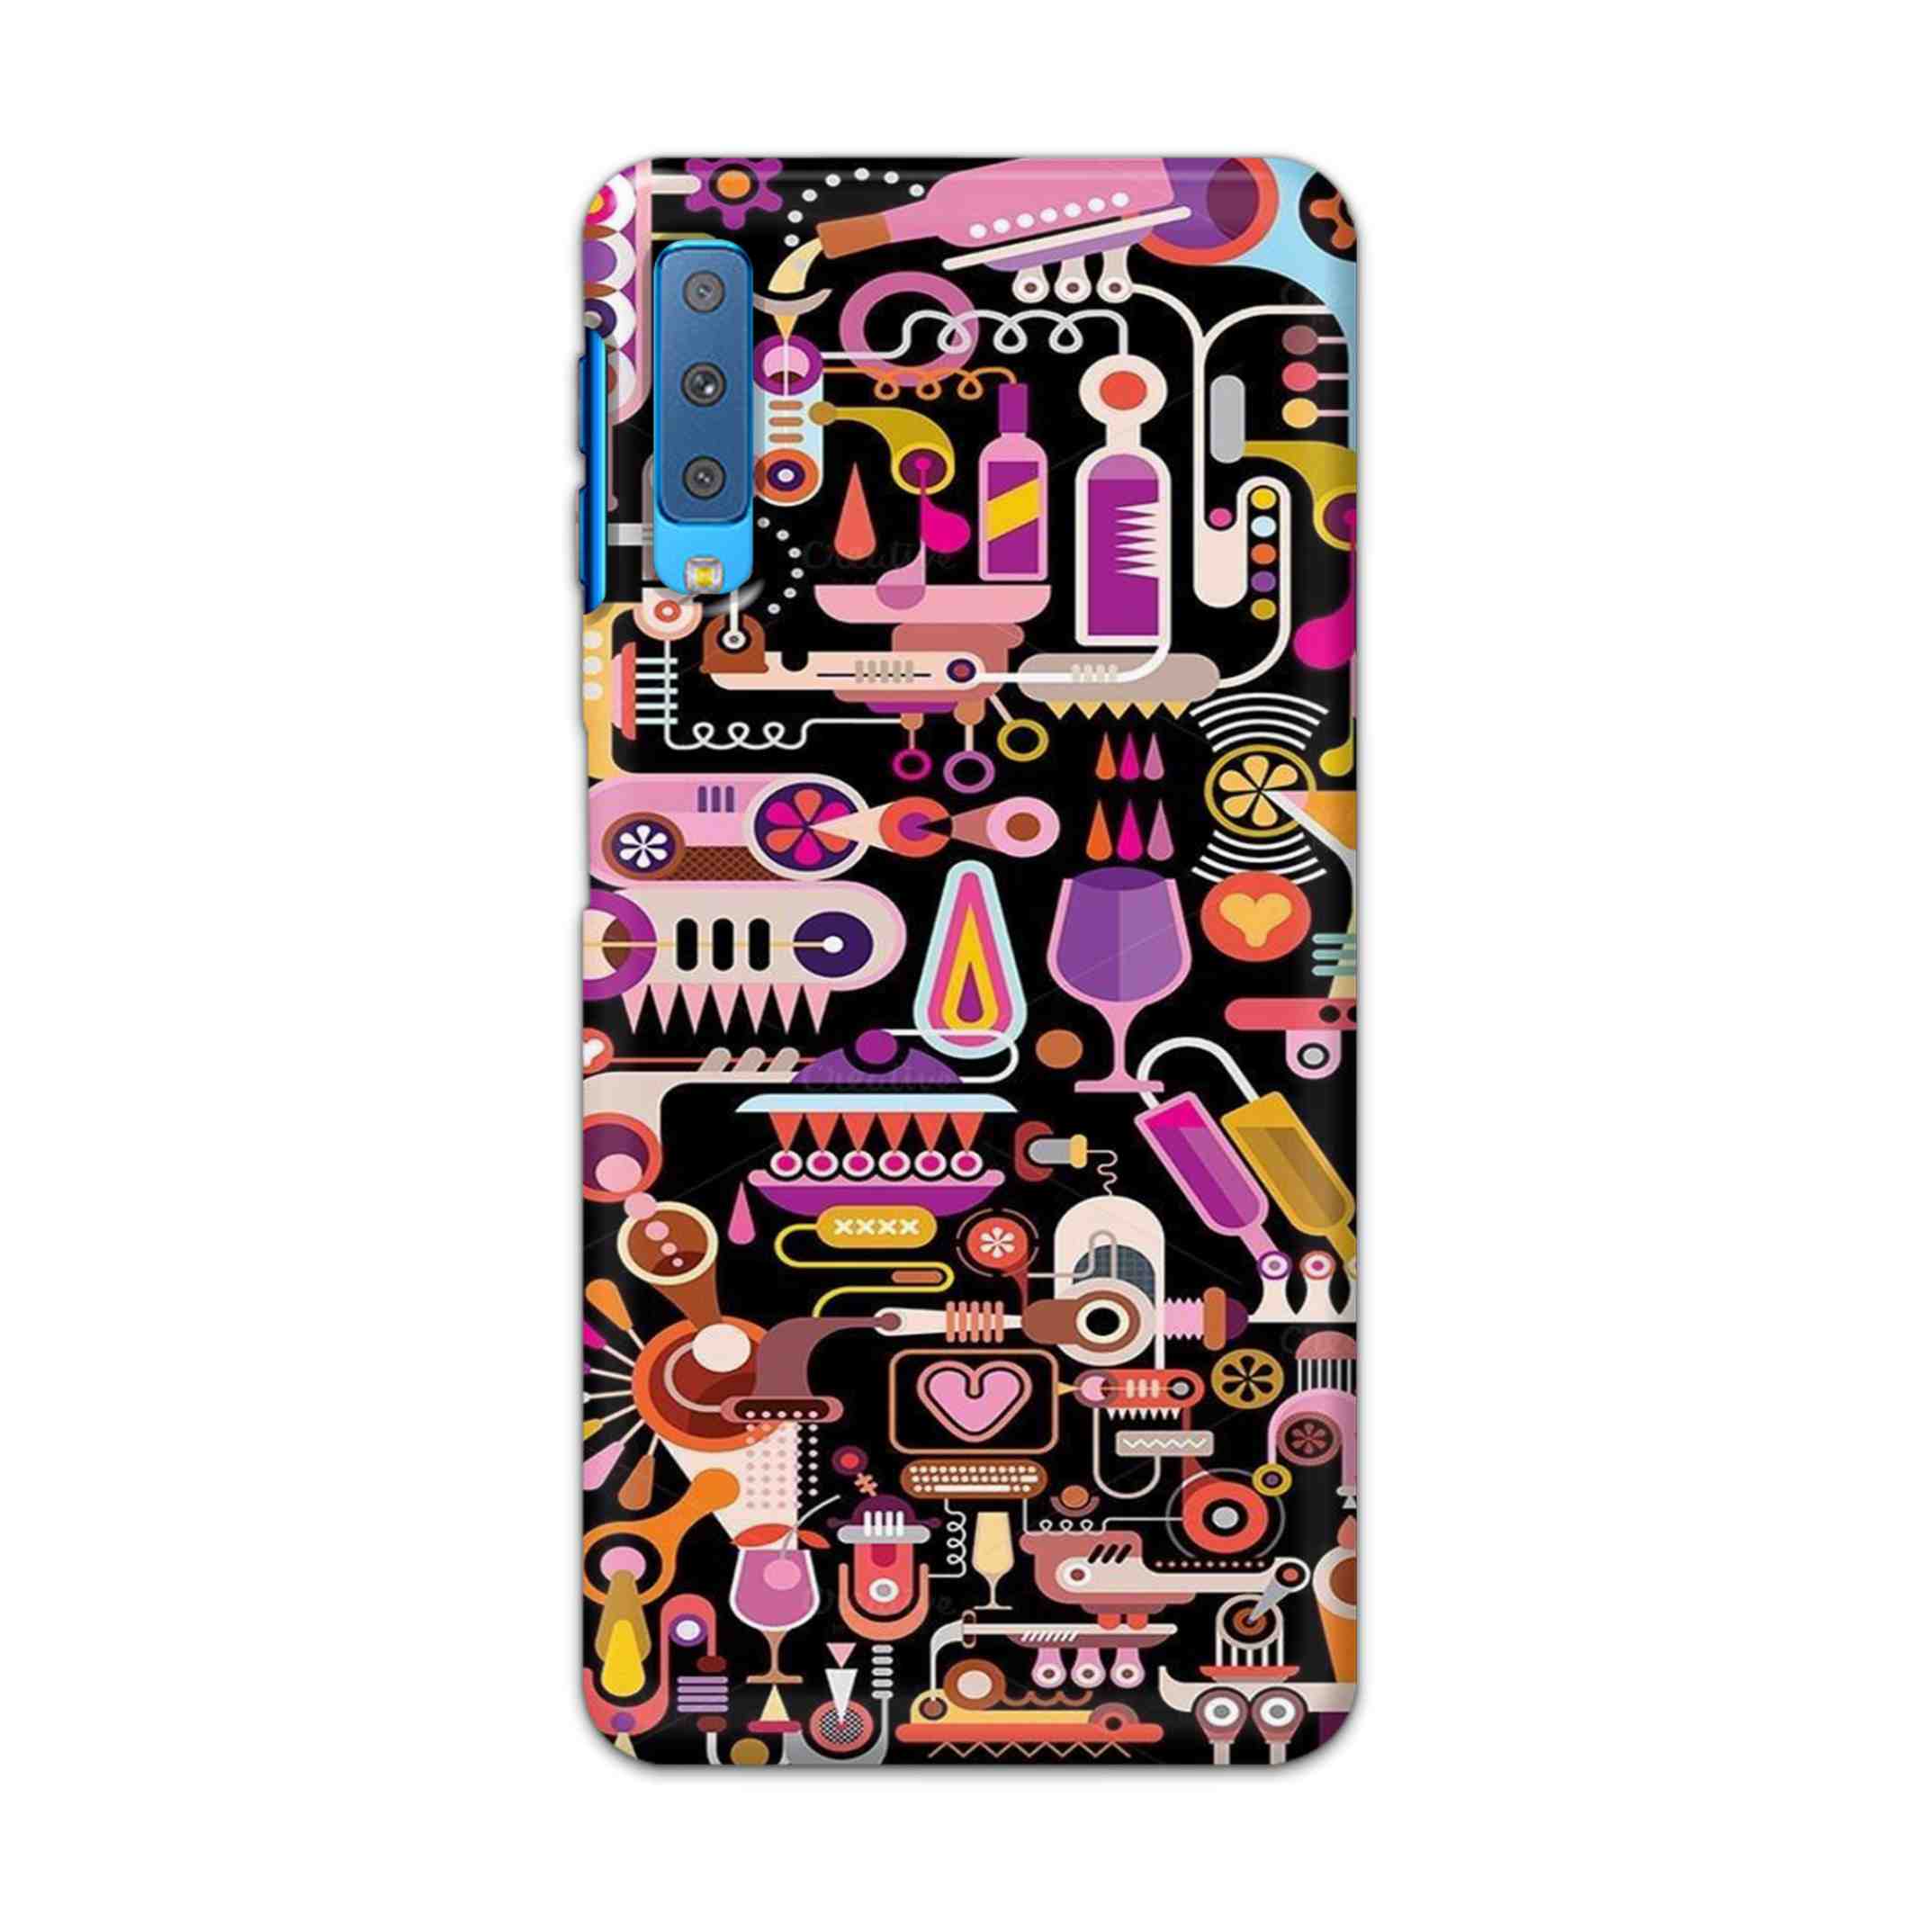 Buy Lab Art Hard Back Mobile Phone Case Cover For Samsung Galaxy A7 2018 Online